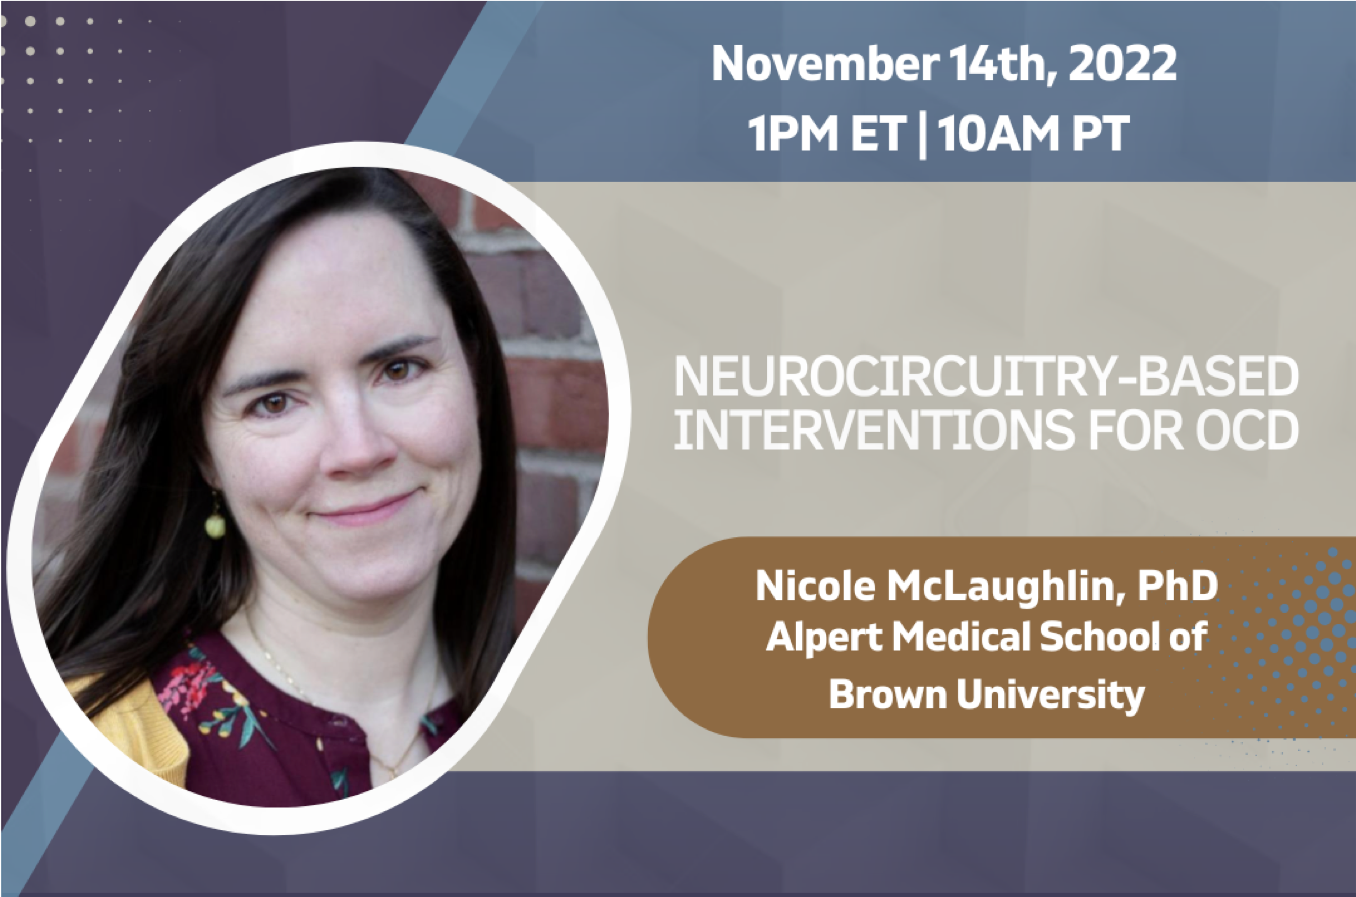 Neurocircuitry-Based Interventions for OCD by Dr. Nicole McLaughlin on November 14, 2022